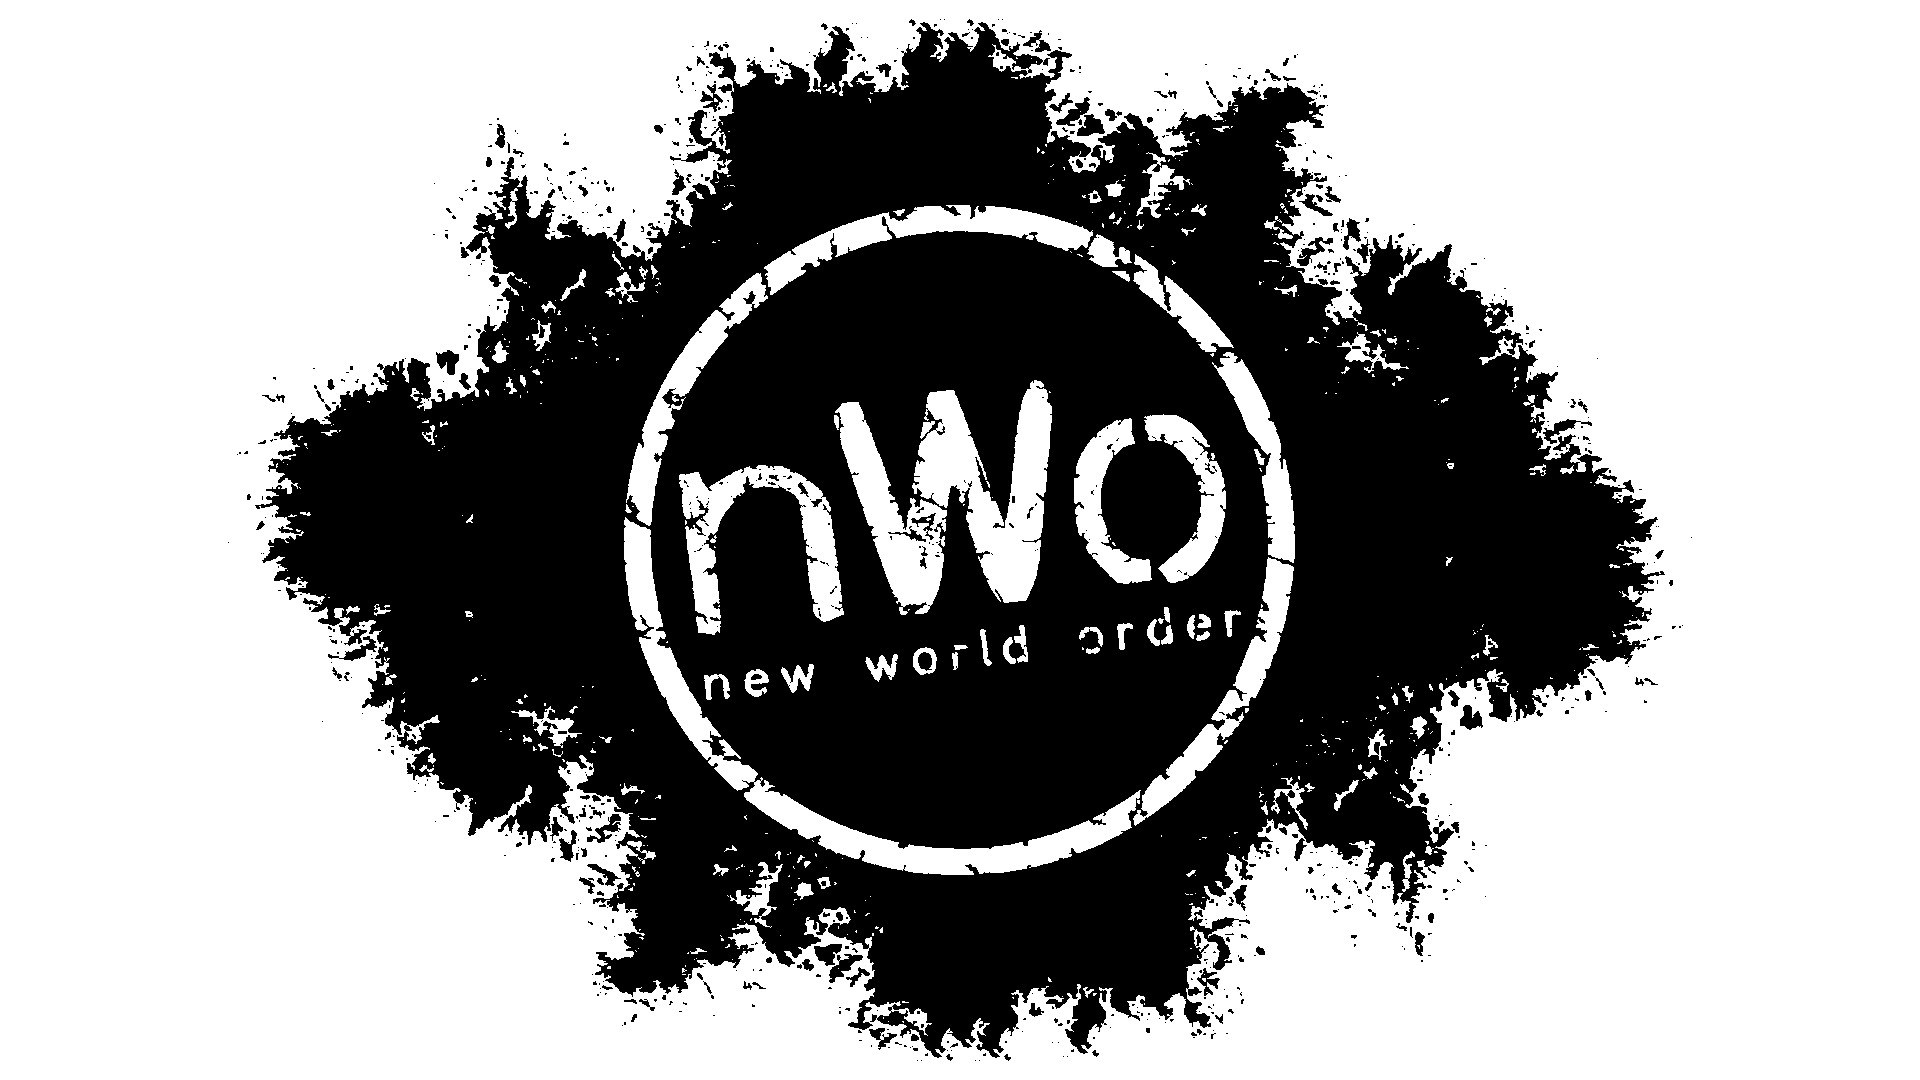 1920x1080 New World Order Logo Wallpaper (1080p) by DarkVoidPictures on .